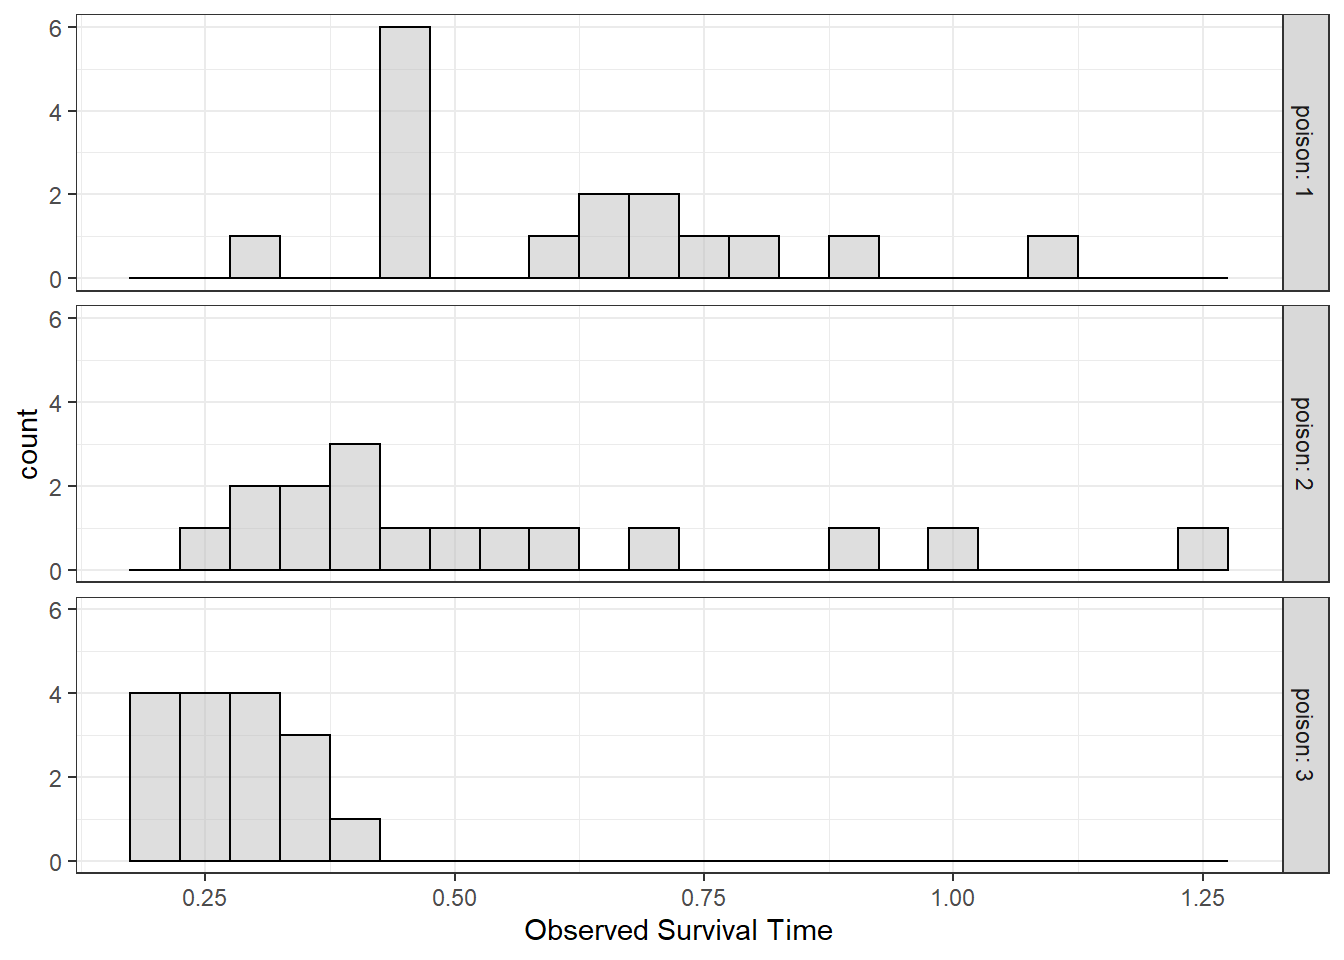 Distribution of Survival Time by Poison Type: Histograms used to Judge Normality